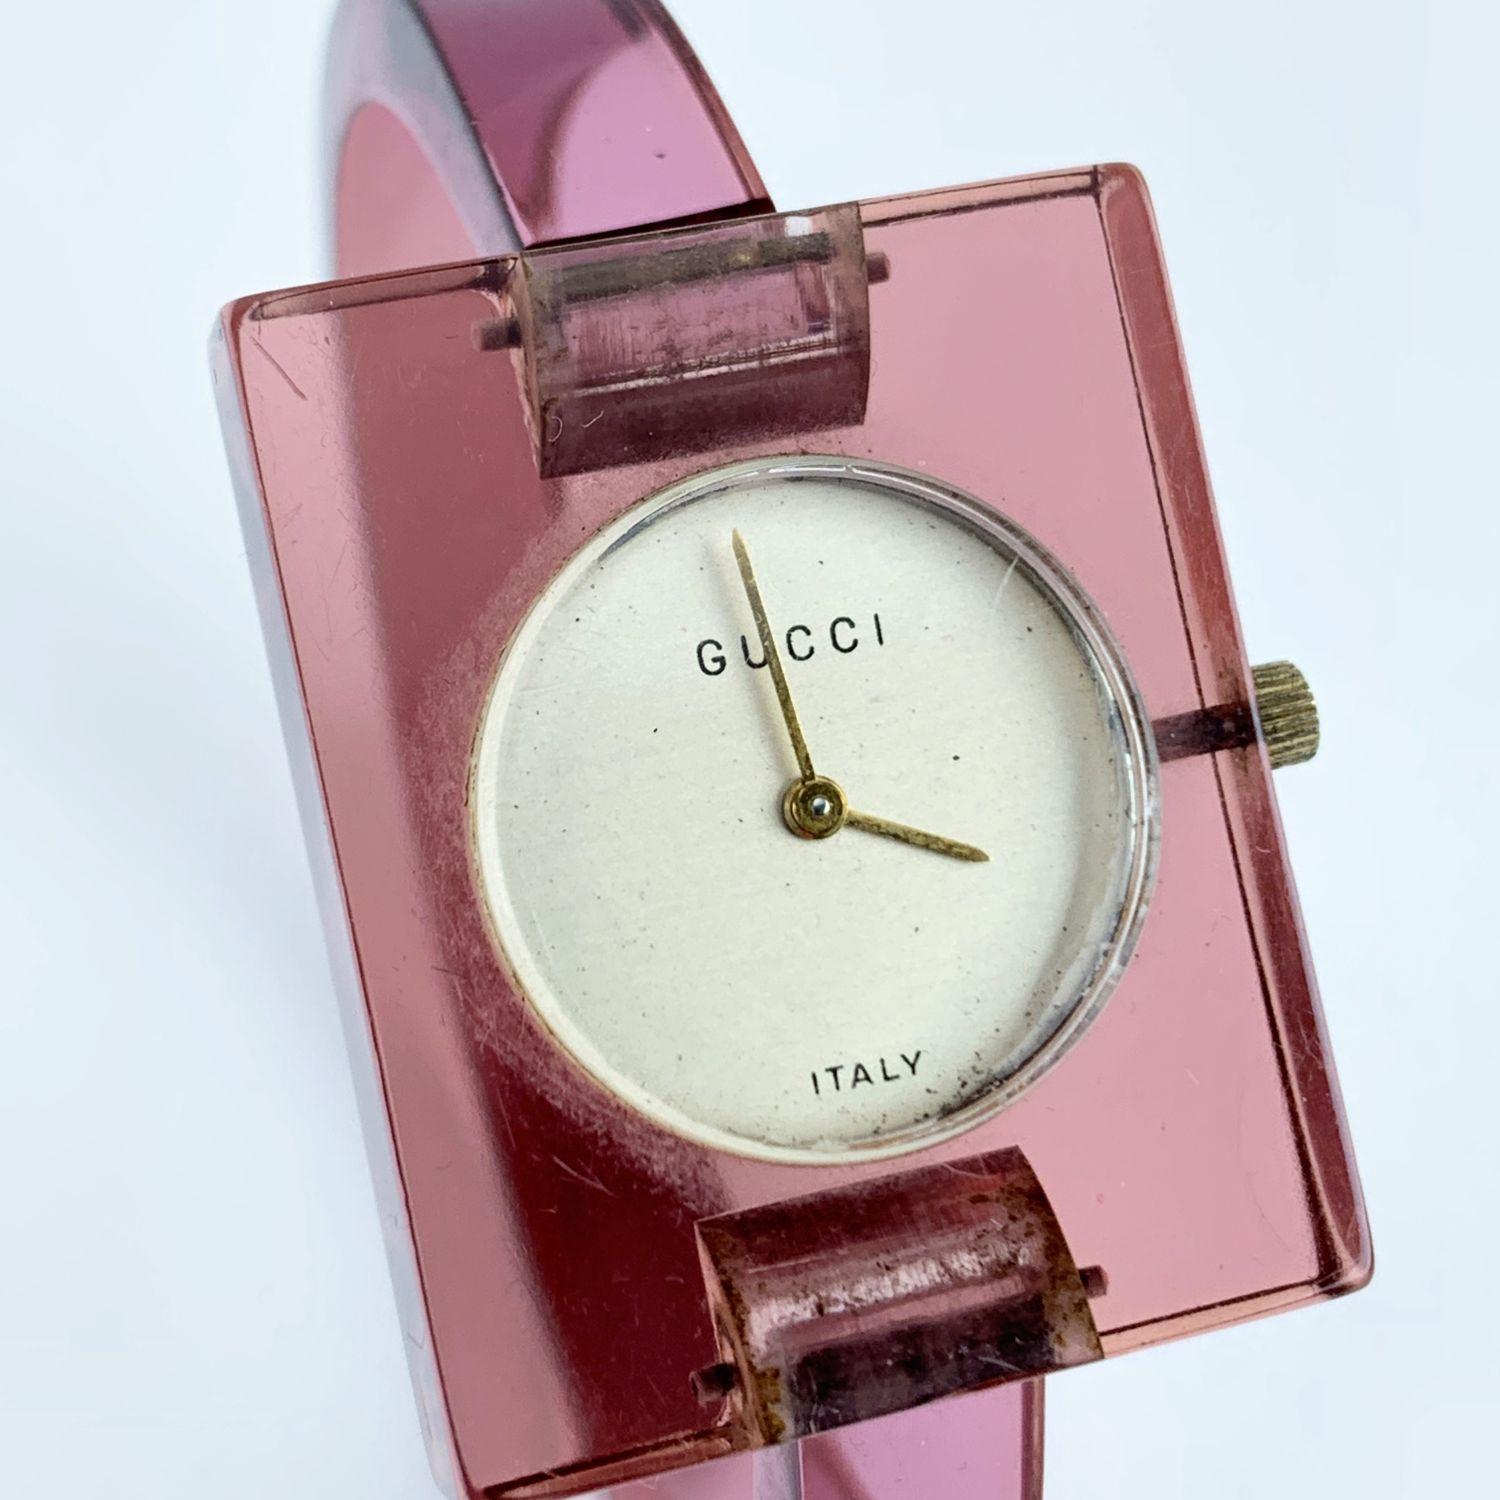 Beautiful vintage bangle wristwatch by GUCCI in translucent pink lucite. Rectangle-shaped case.17 Jewels Swiss Wind-Up. Light gold dial. Clasp closure. 'GUCCI' and 'Italy' embossed on the dial. Bracelet diameter: 2.25 Inches - 5,8 cm. Case width: 30